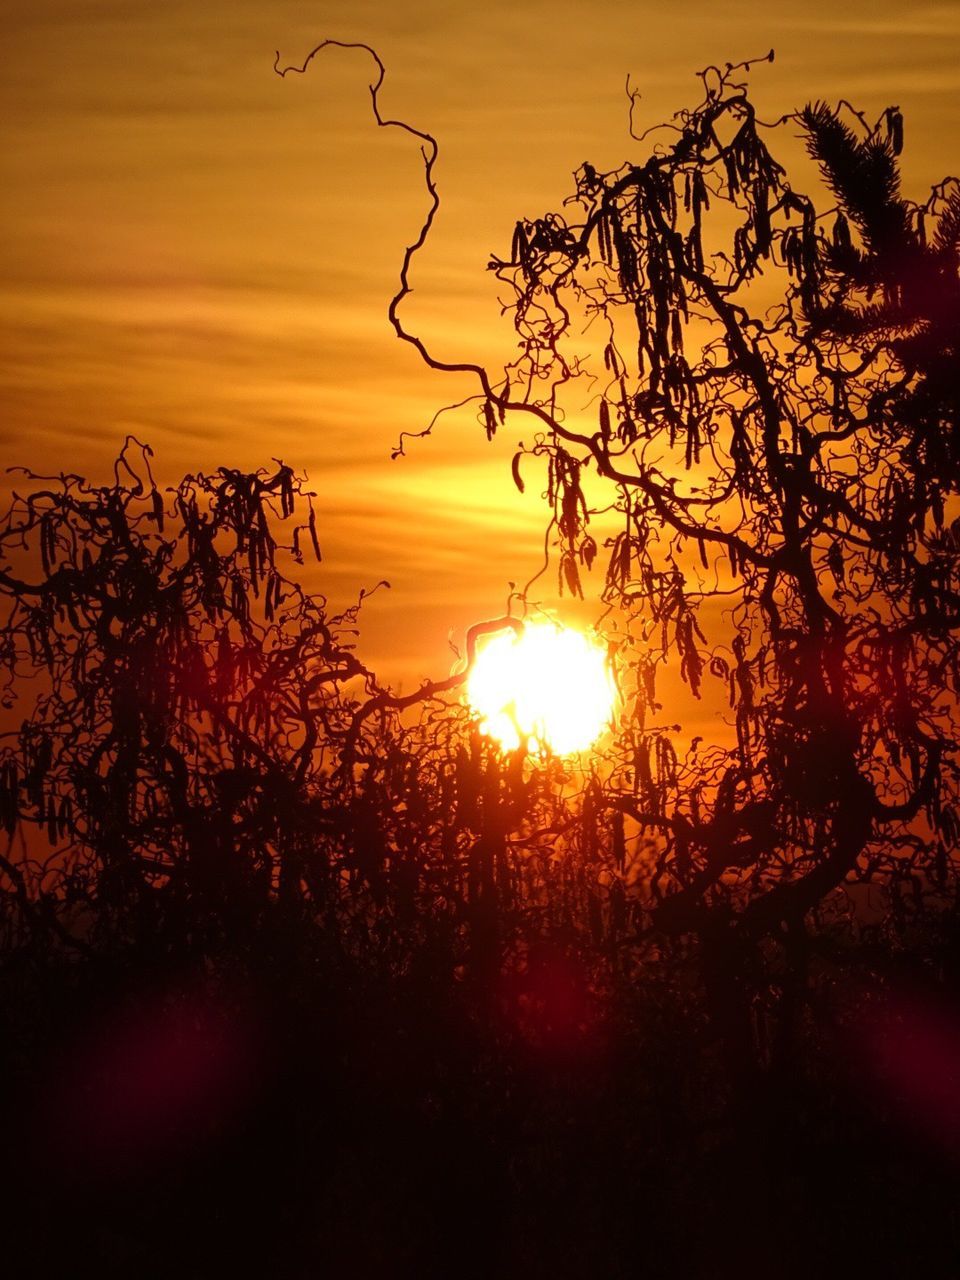 CLOSE-UP OF SILHOUETTE TREES AGAINST SUNSET